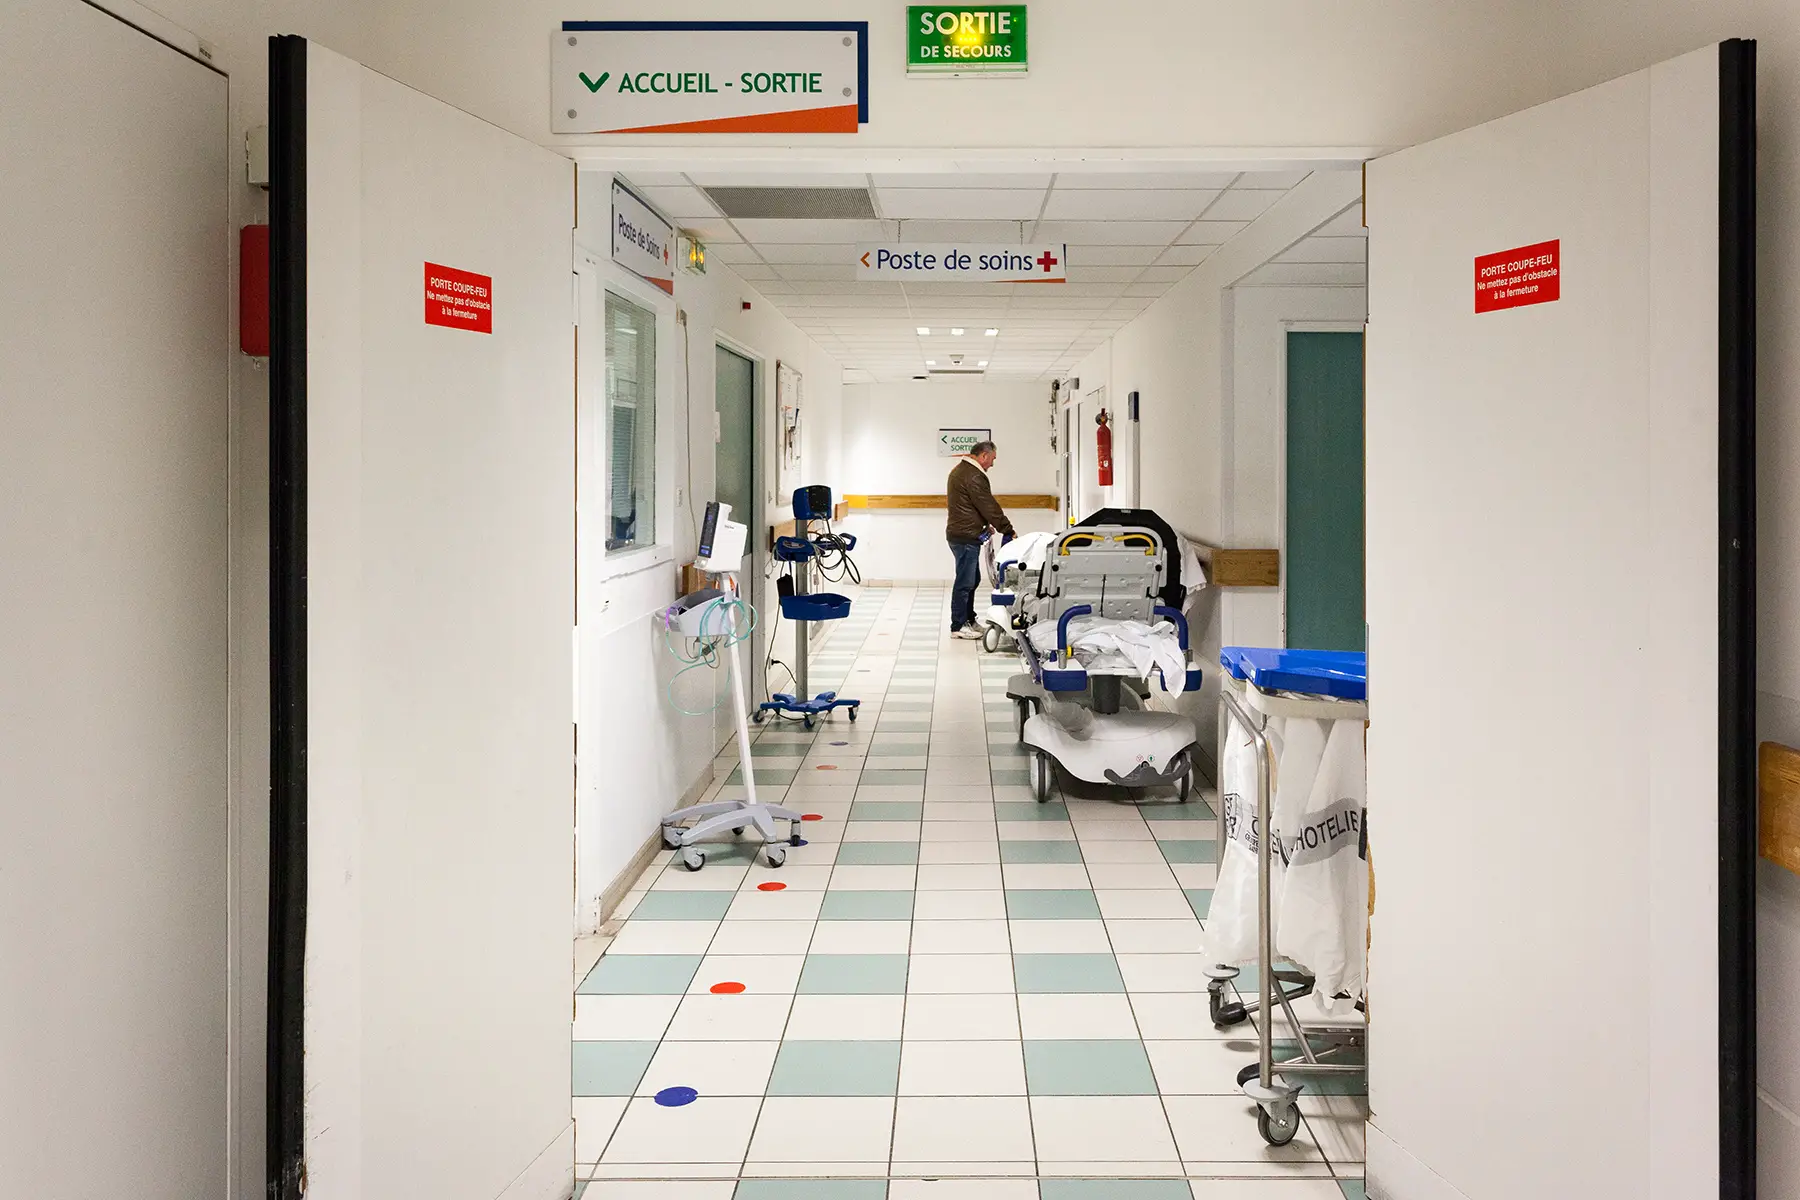 A man stands at the end of a long, empty hospital corridor in Aix-en-Provence, France